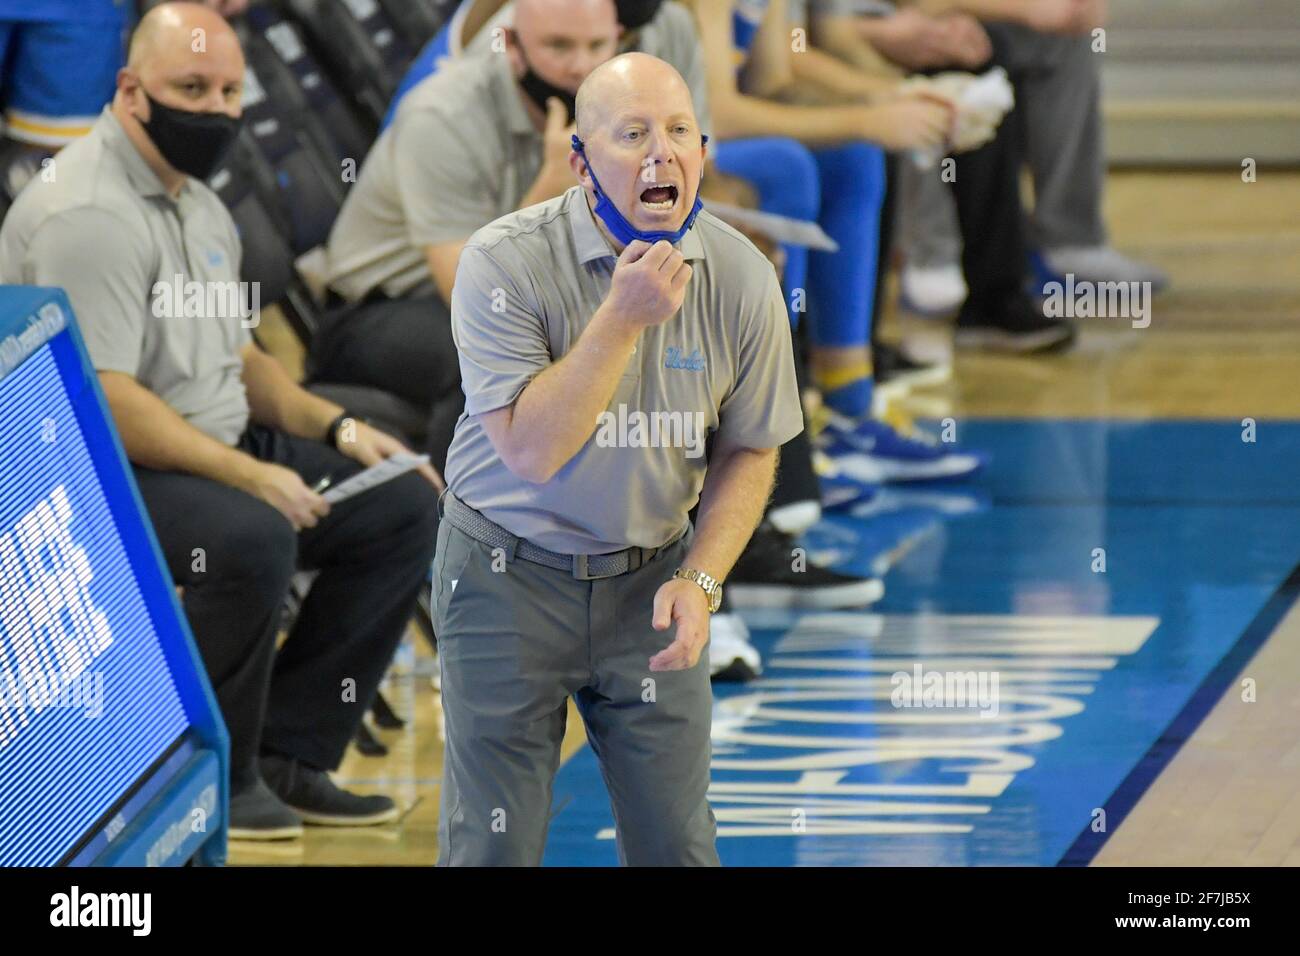 UCLA Bruins head coach Mick Cronin screams during an NCAA basketball game against the USC Trojans, Saturday, Mar 6, 2021 in Los Angeles. USC defeated Stock Photo